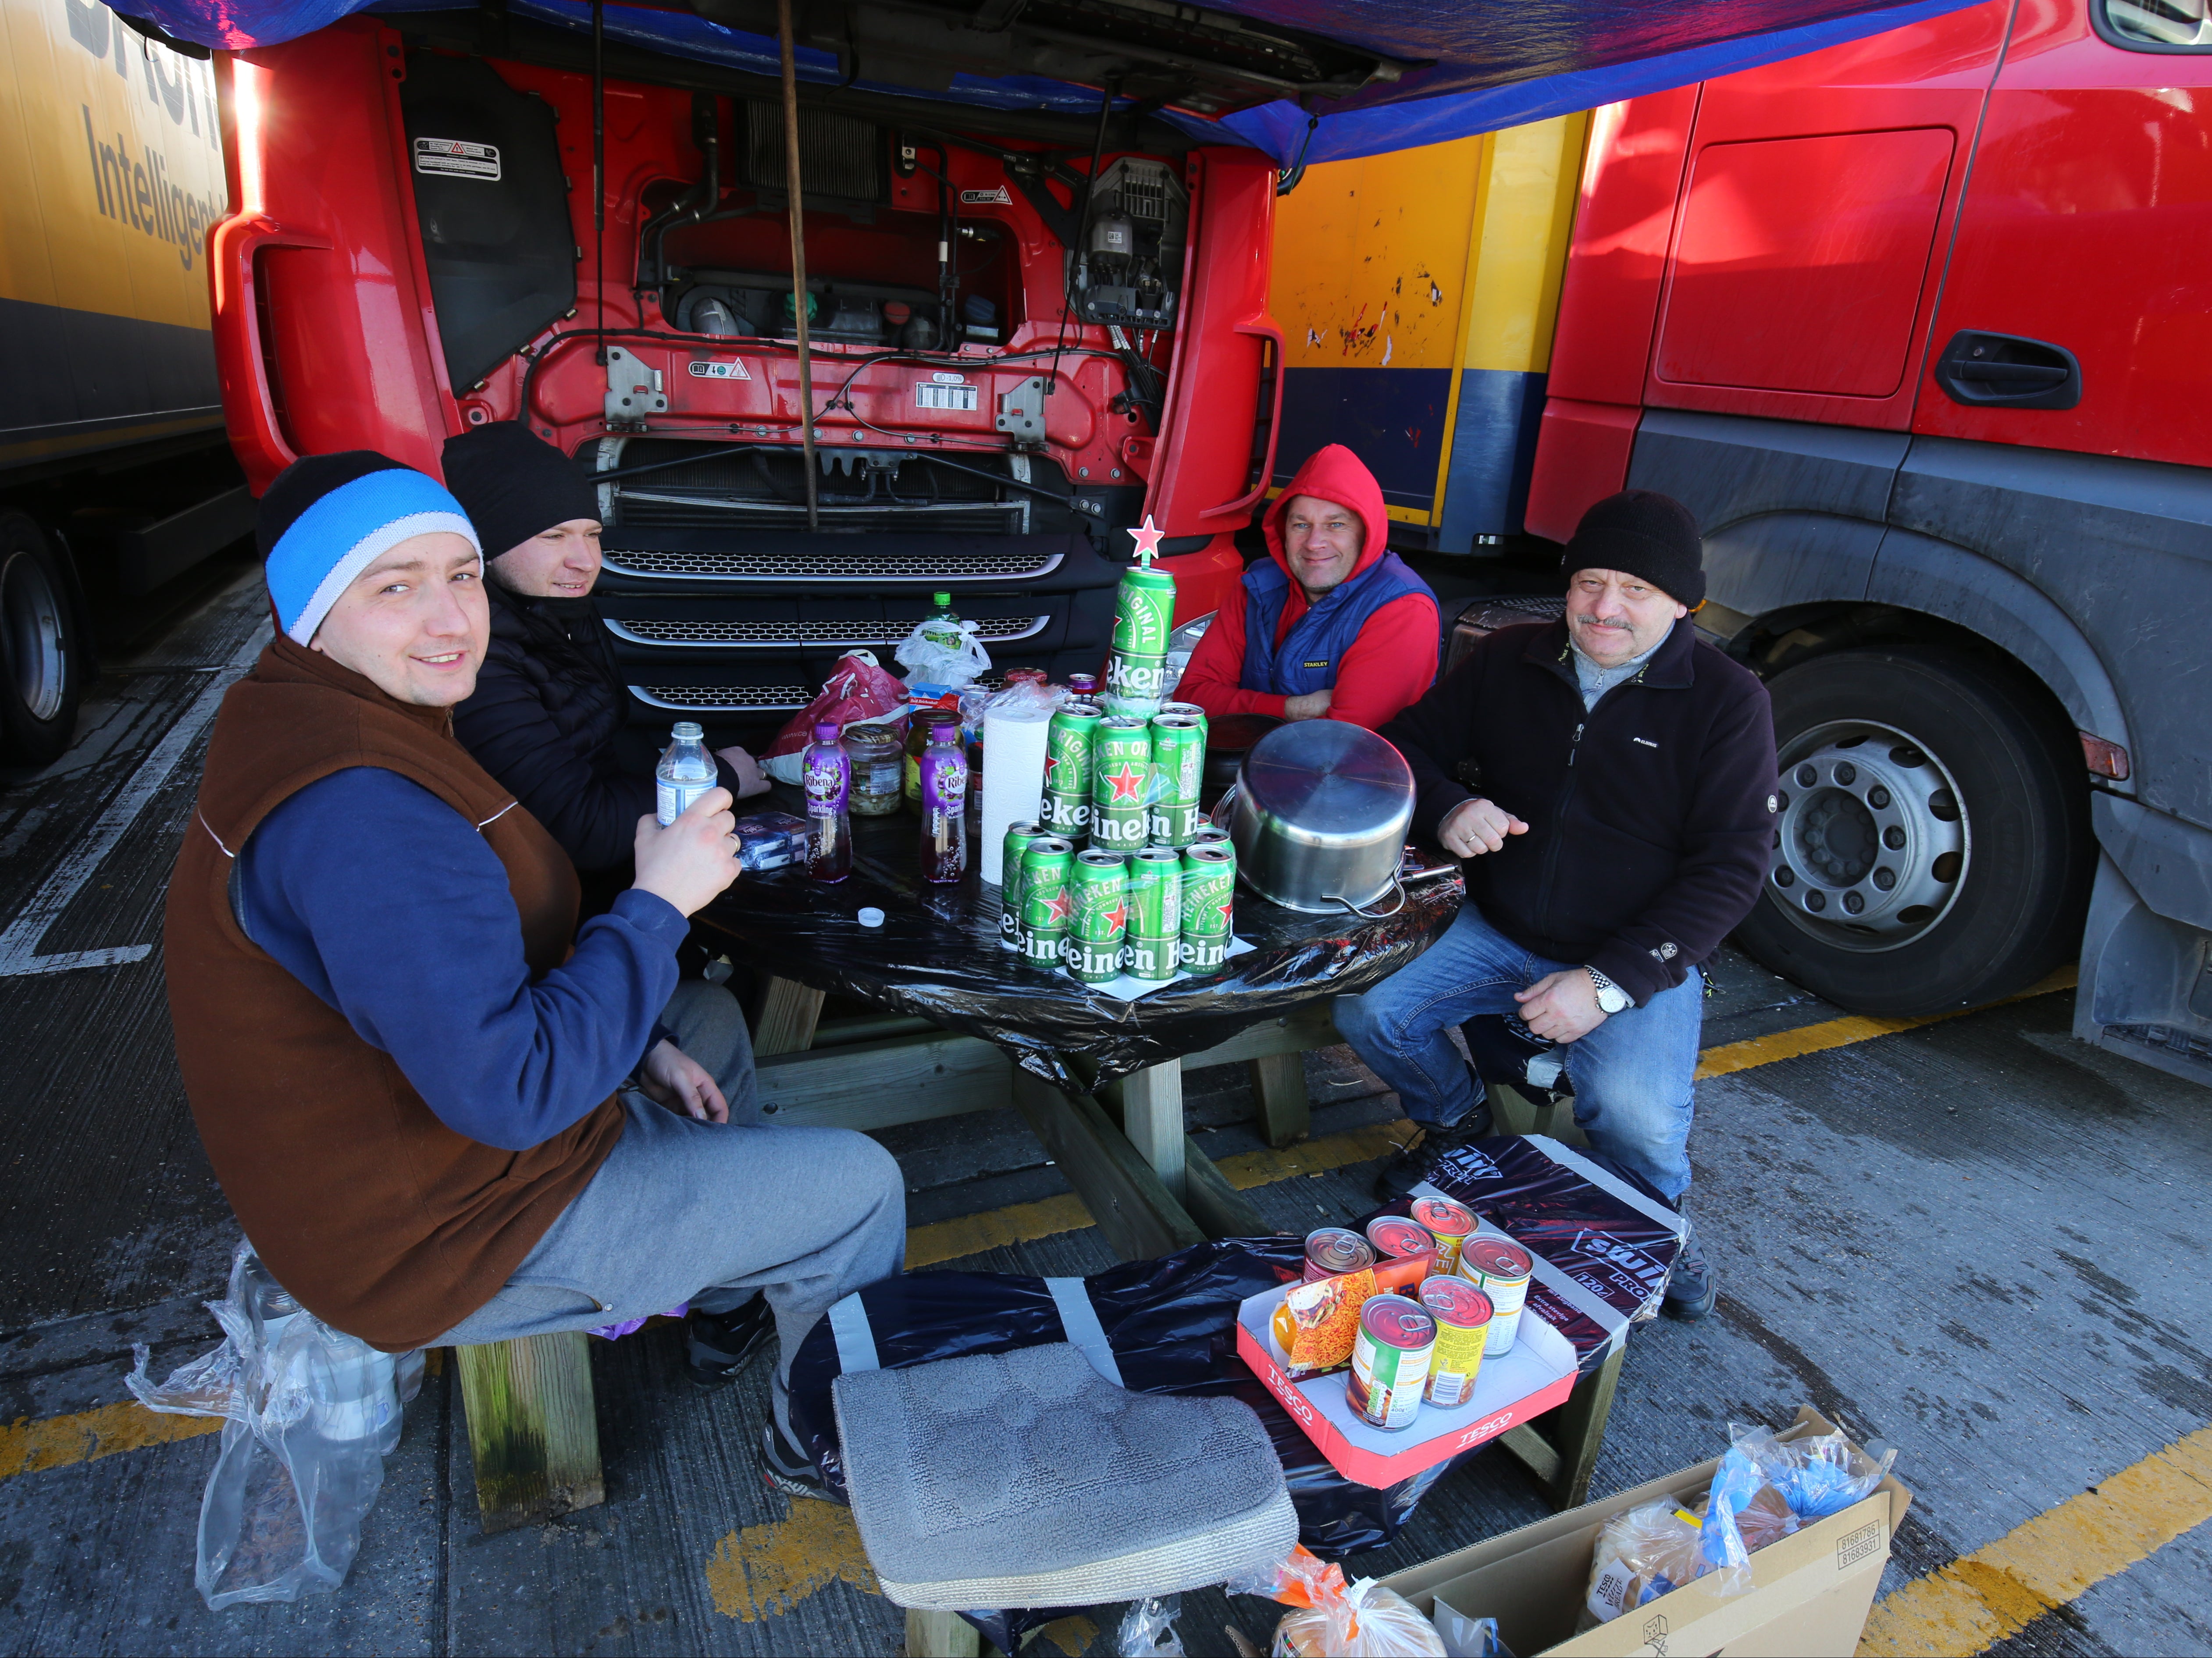 Polish lorry drivers, with a makeshift Christmas tree fashioned out of empty Heineken cans, share Christmas Day food and drinks at a truck stop near Folkestone, Kent